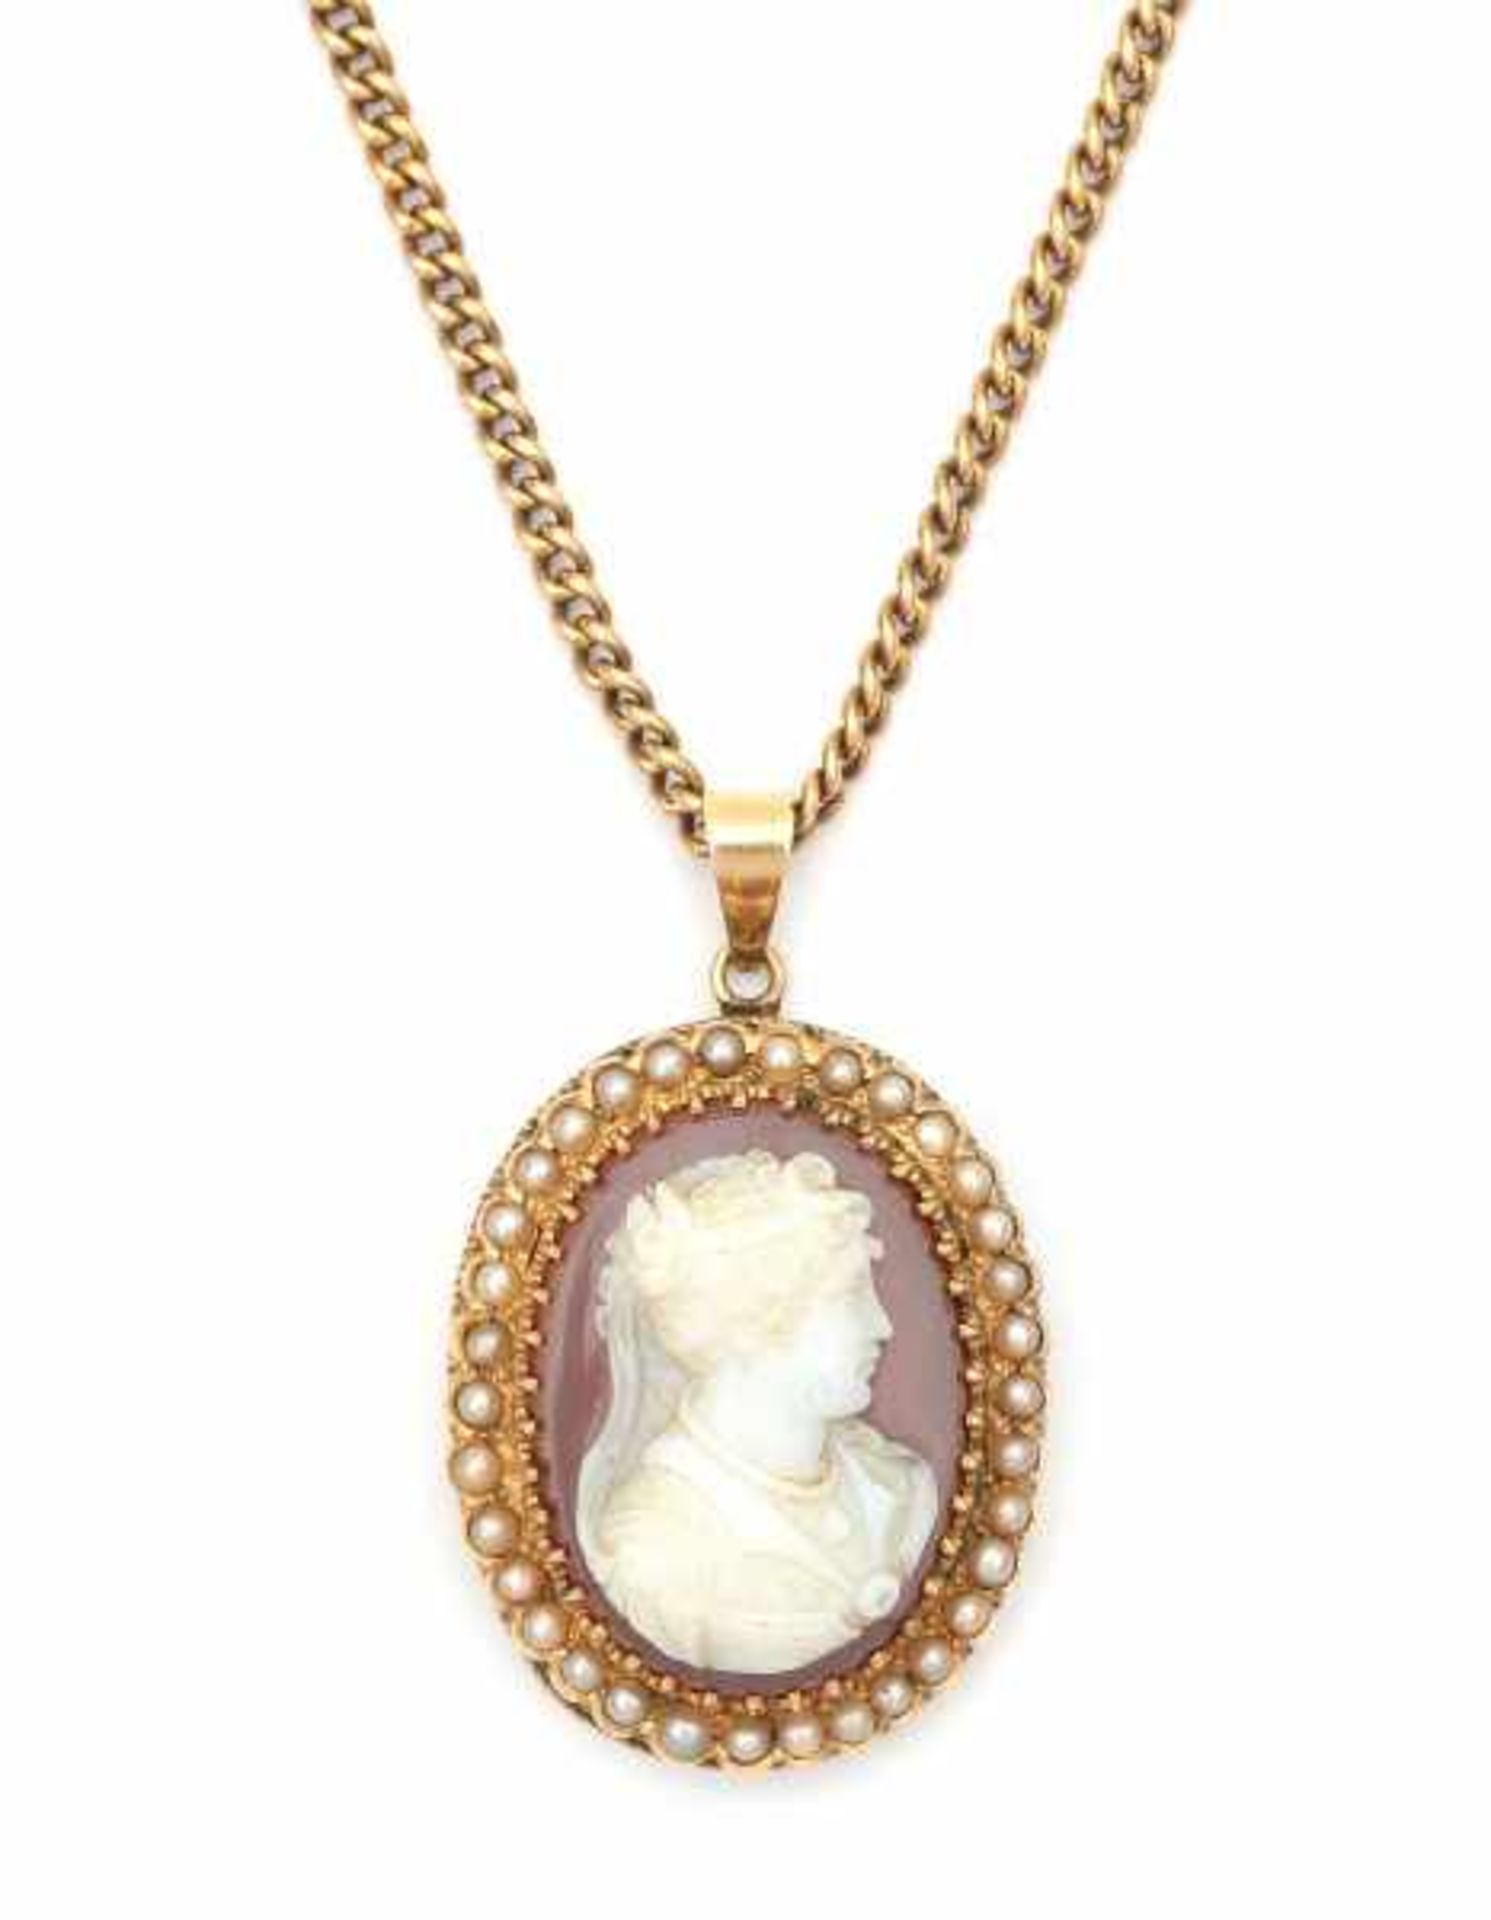 A 14 carat yellow gold necklace with cameo pendant from the 19th Century. Hardstone cameo is set